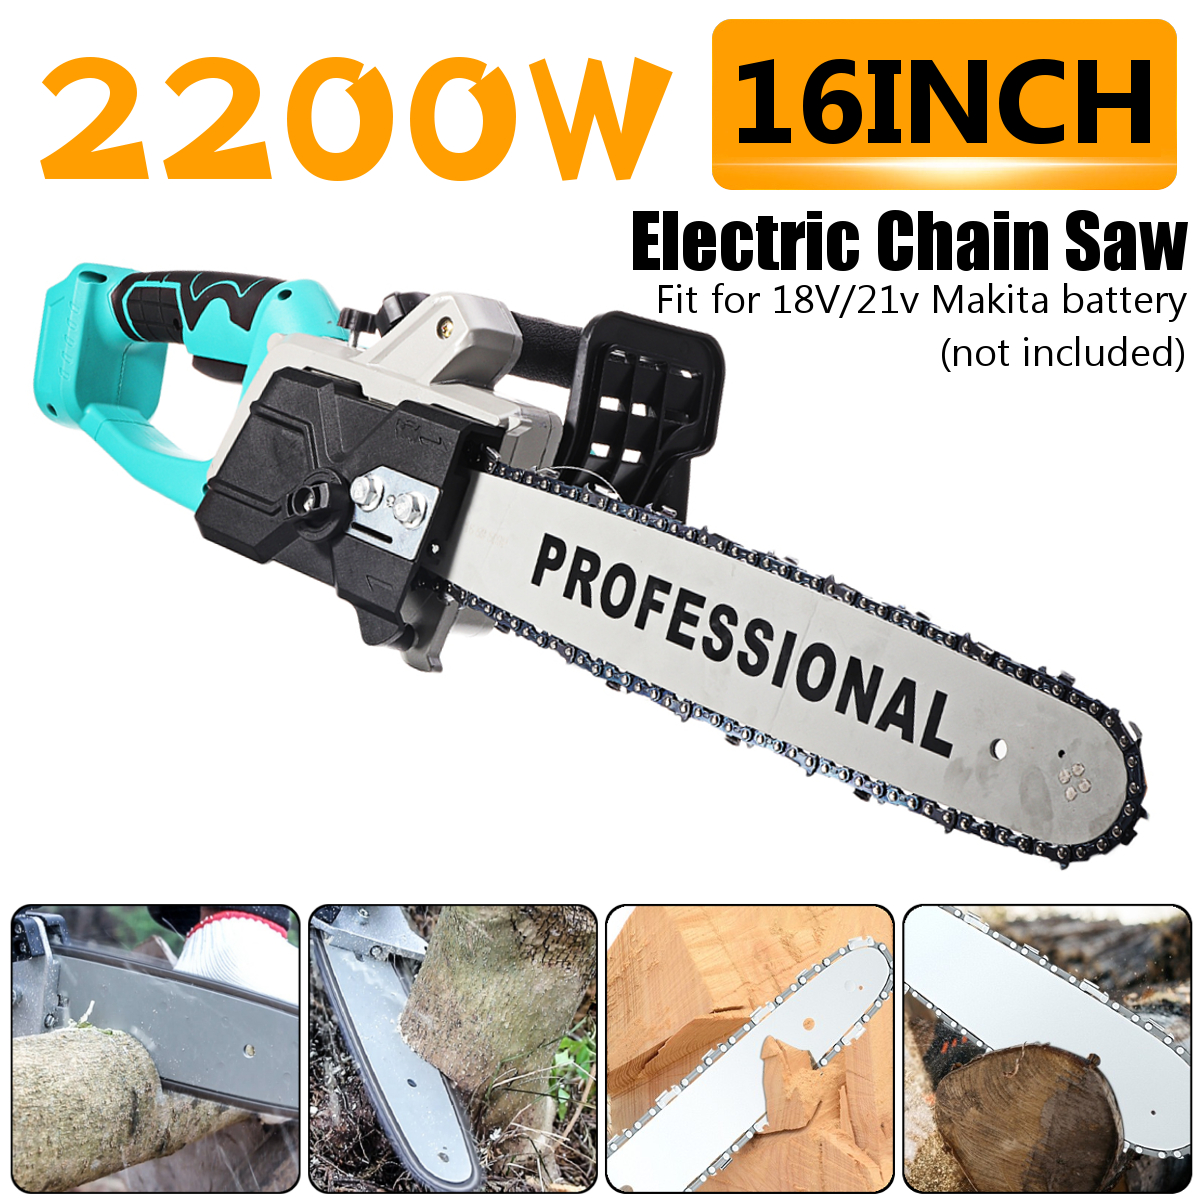 2200W-Electric-Cordless-Chainsaw-Multi-function-Chain-Saw-Kit-For-Makita-18V21V-Battery-1765822-3